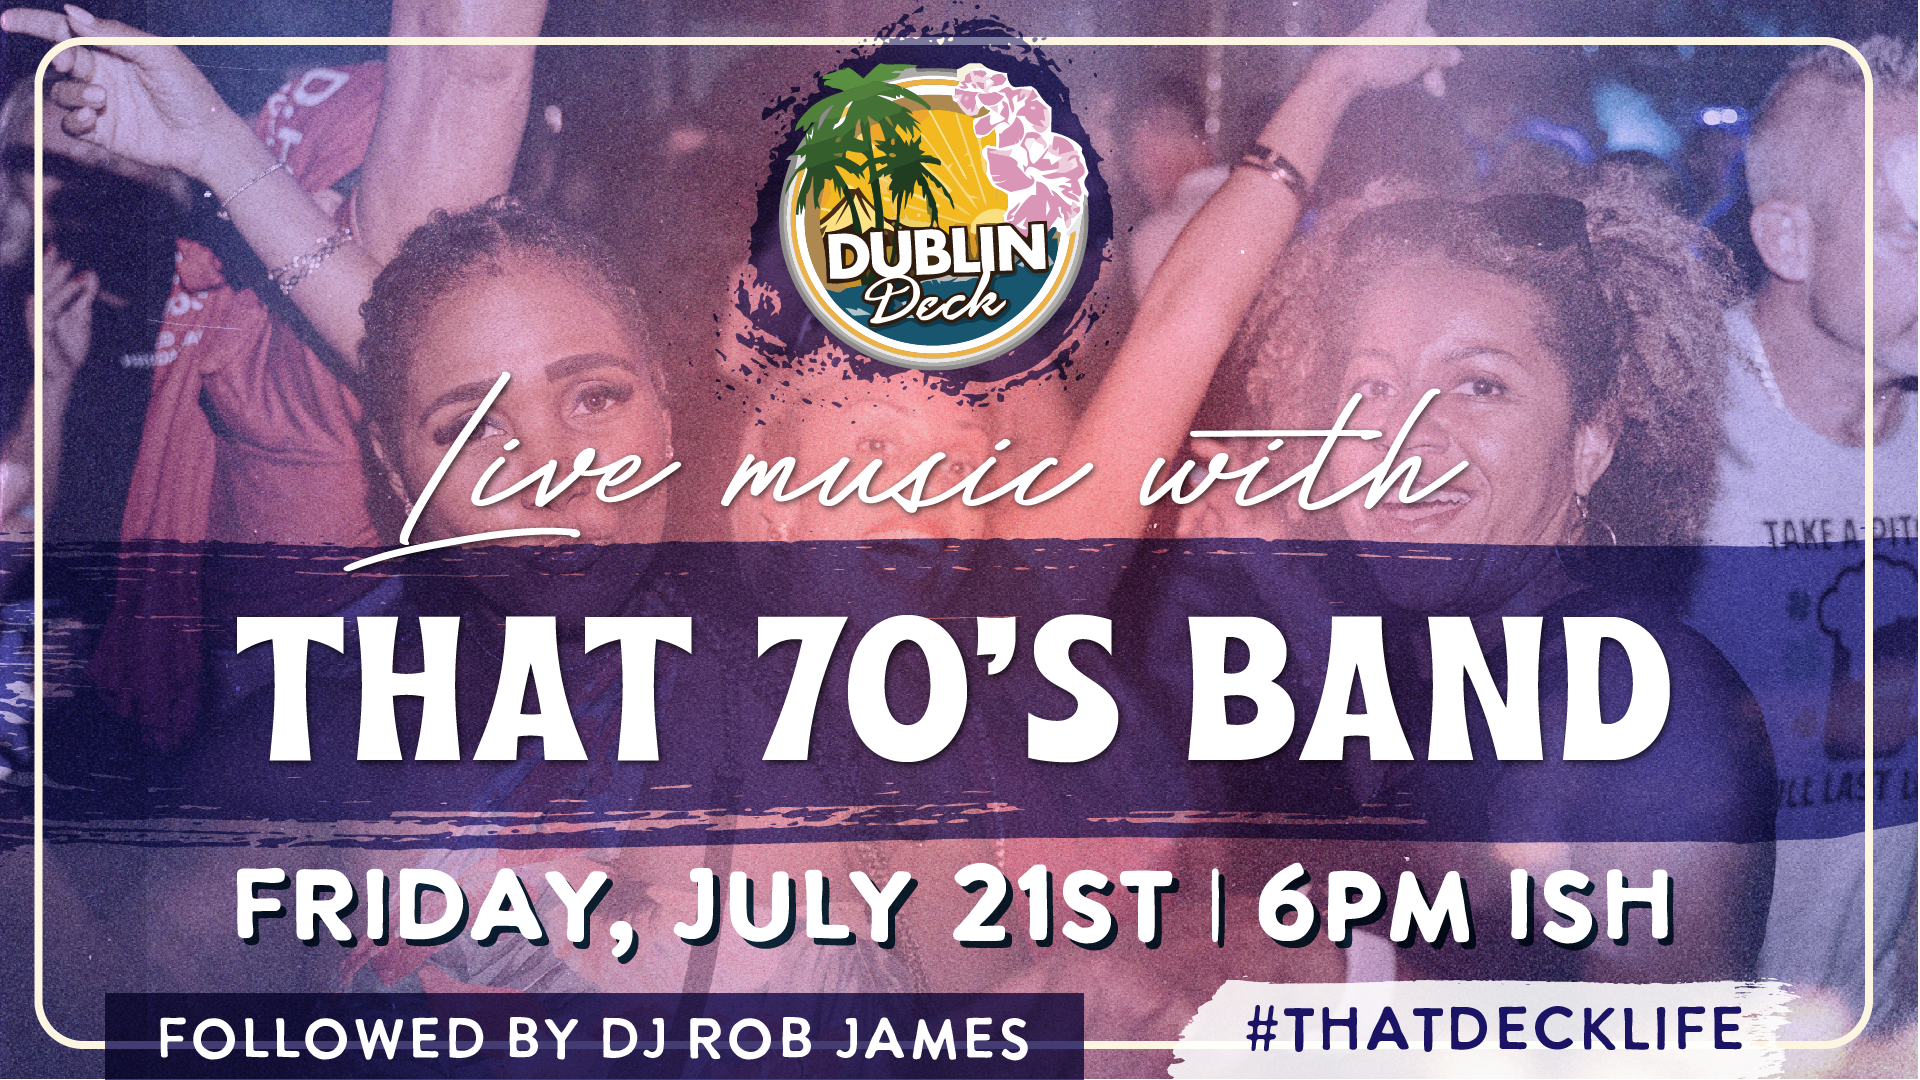 Enjoy tunes from That 70's Band with us at Dublin Deck! Music starts at 6PM-ish